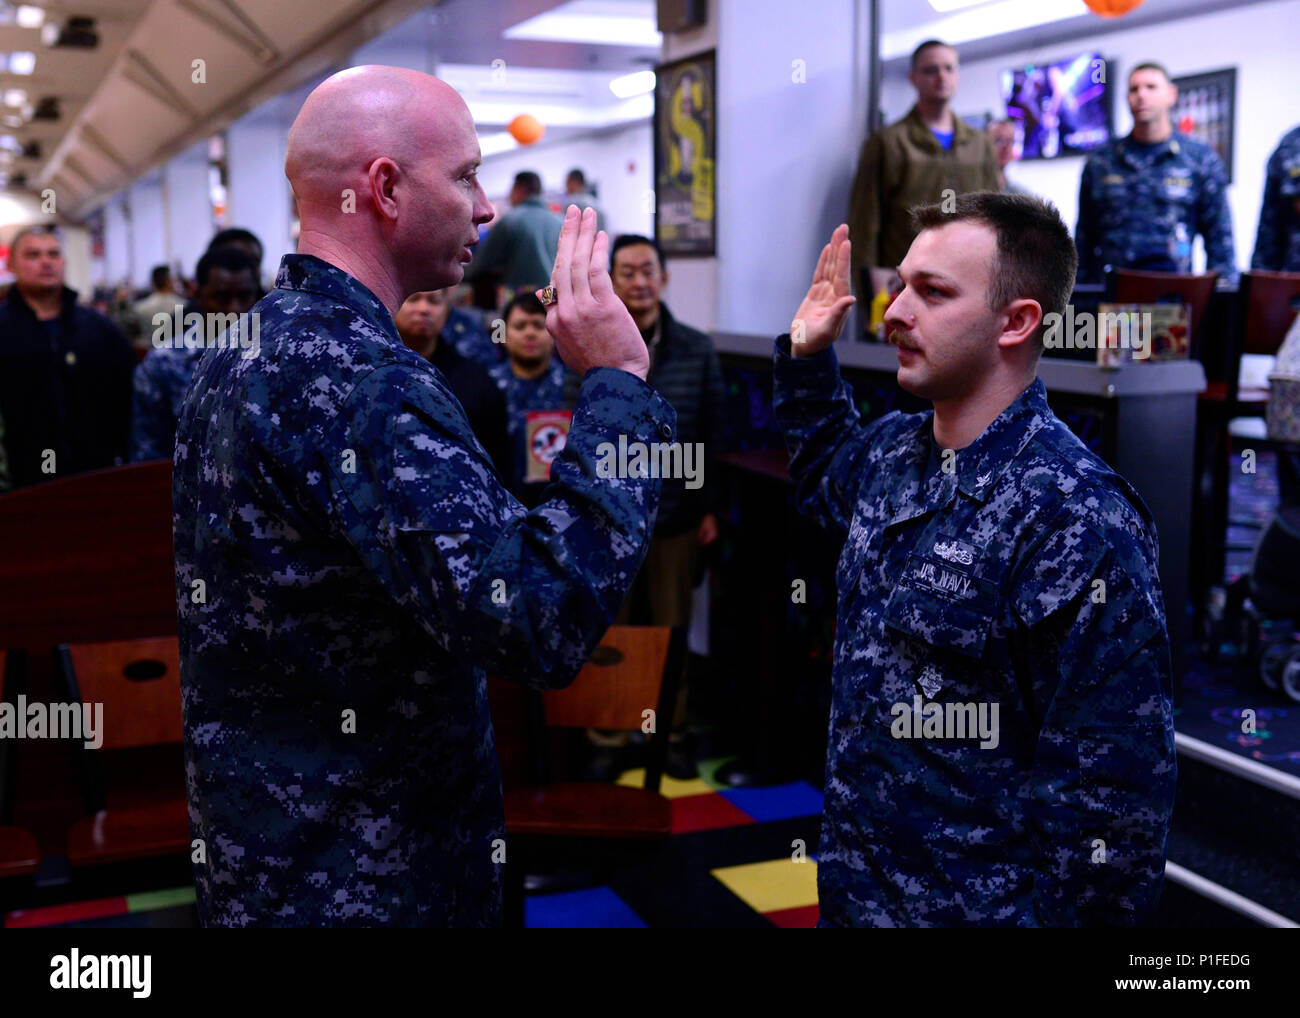 161028-N-OK605-007 MISAWA, Japan (Oct. 28, 2016) Petty Officer 2nd Class Christopher Plowden, from Stow, Maine, recites the oath of enlistment with Chief Warrant Officer 2 William Behr as he reenlists in the United States Navy. (U.S. Navy Photo by Petty Officer 2nd Class Samuel Weldin/Released) Stock Photo